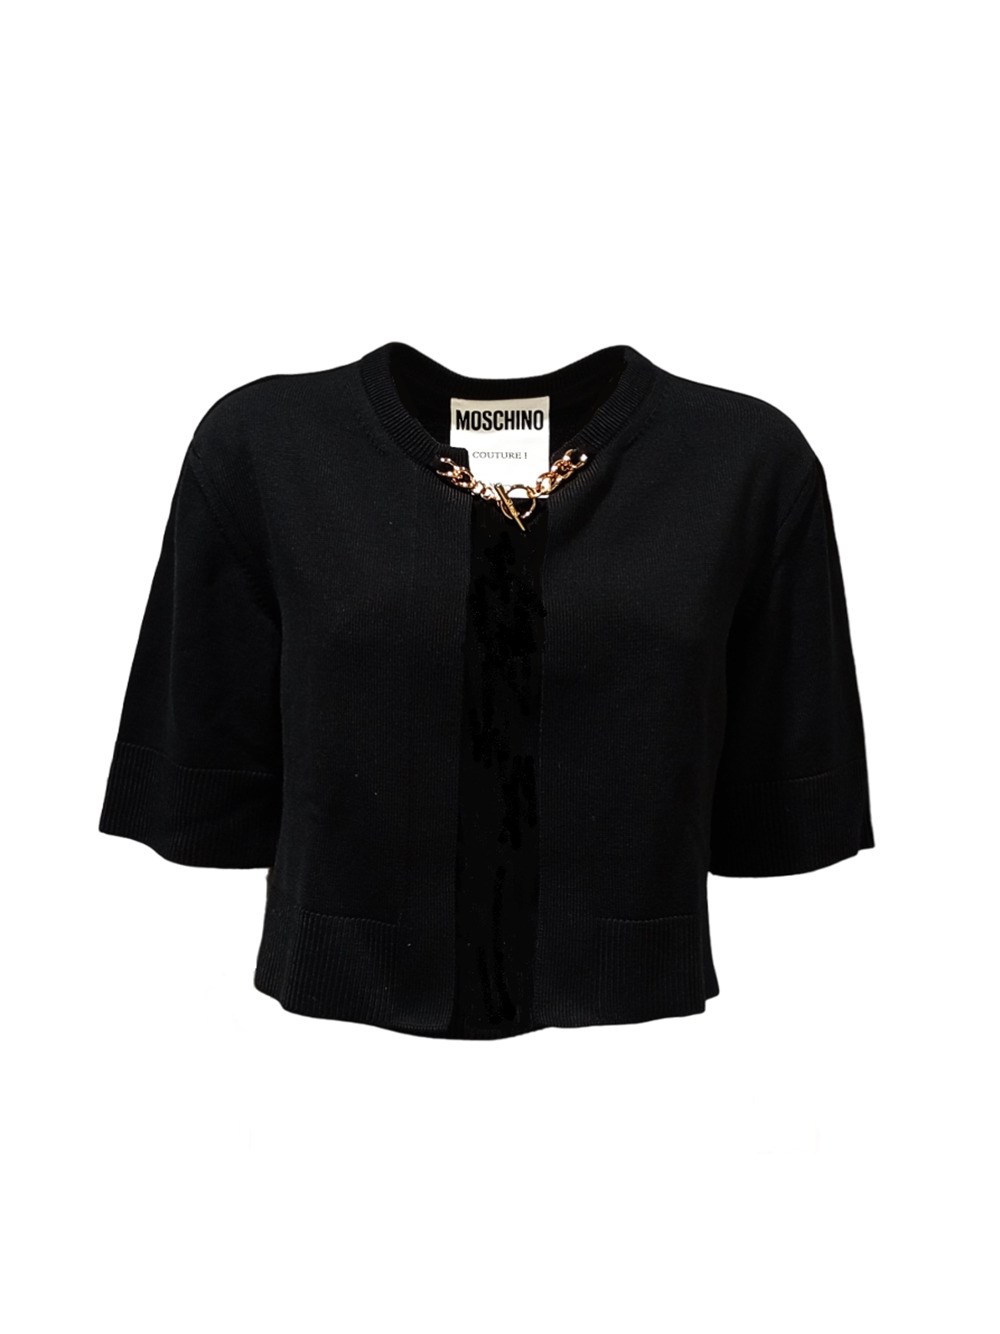 Moschino Knitted Top With Chain In Black